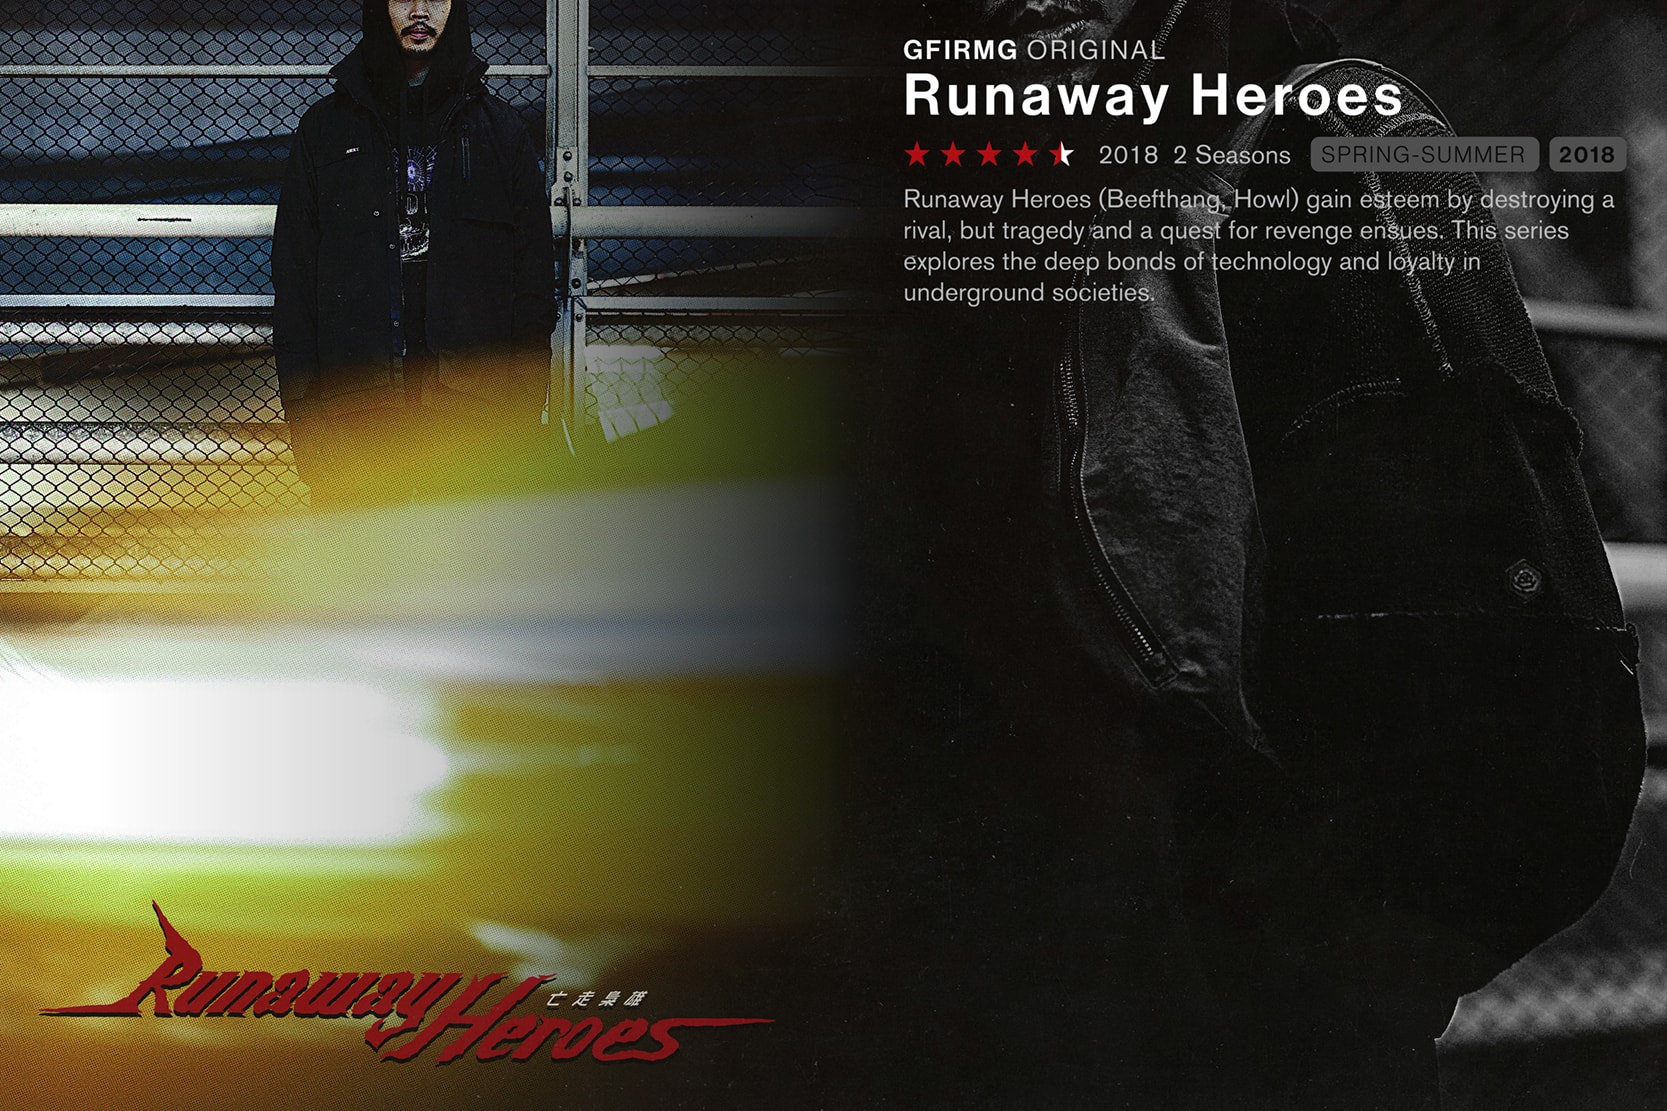 Guerrilla Group Runaway Heroes 2018 Spring Summer Editorial collection